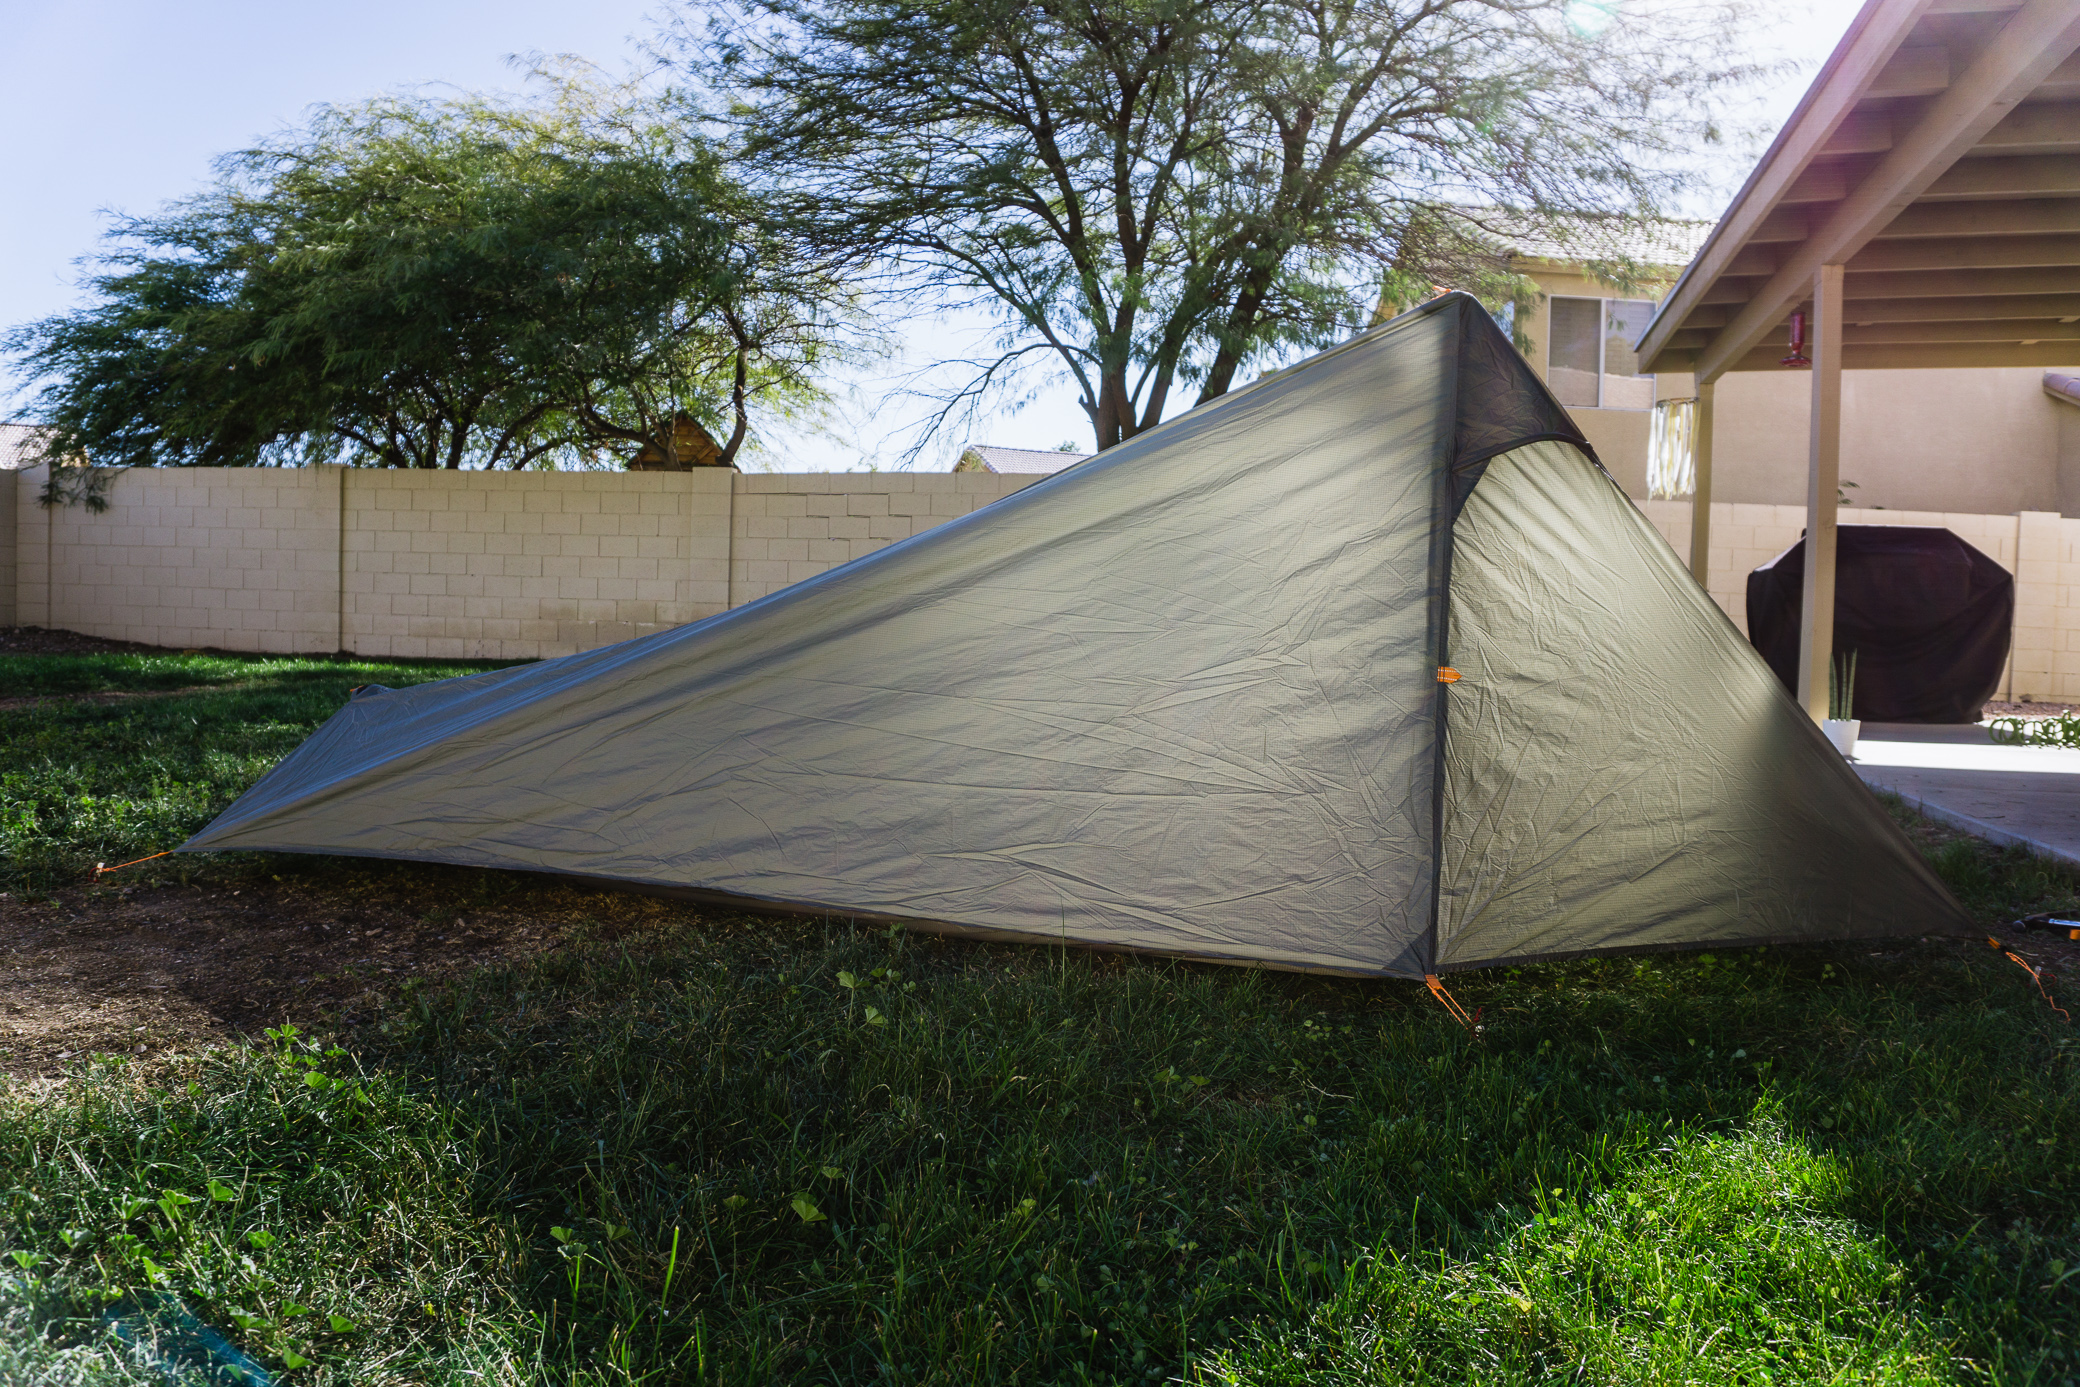 Nemo Spike Storm 1p Tent Review Dialed In Hunter